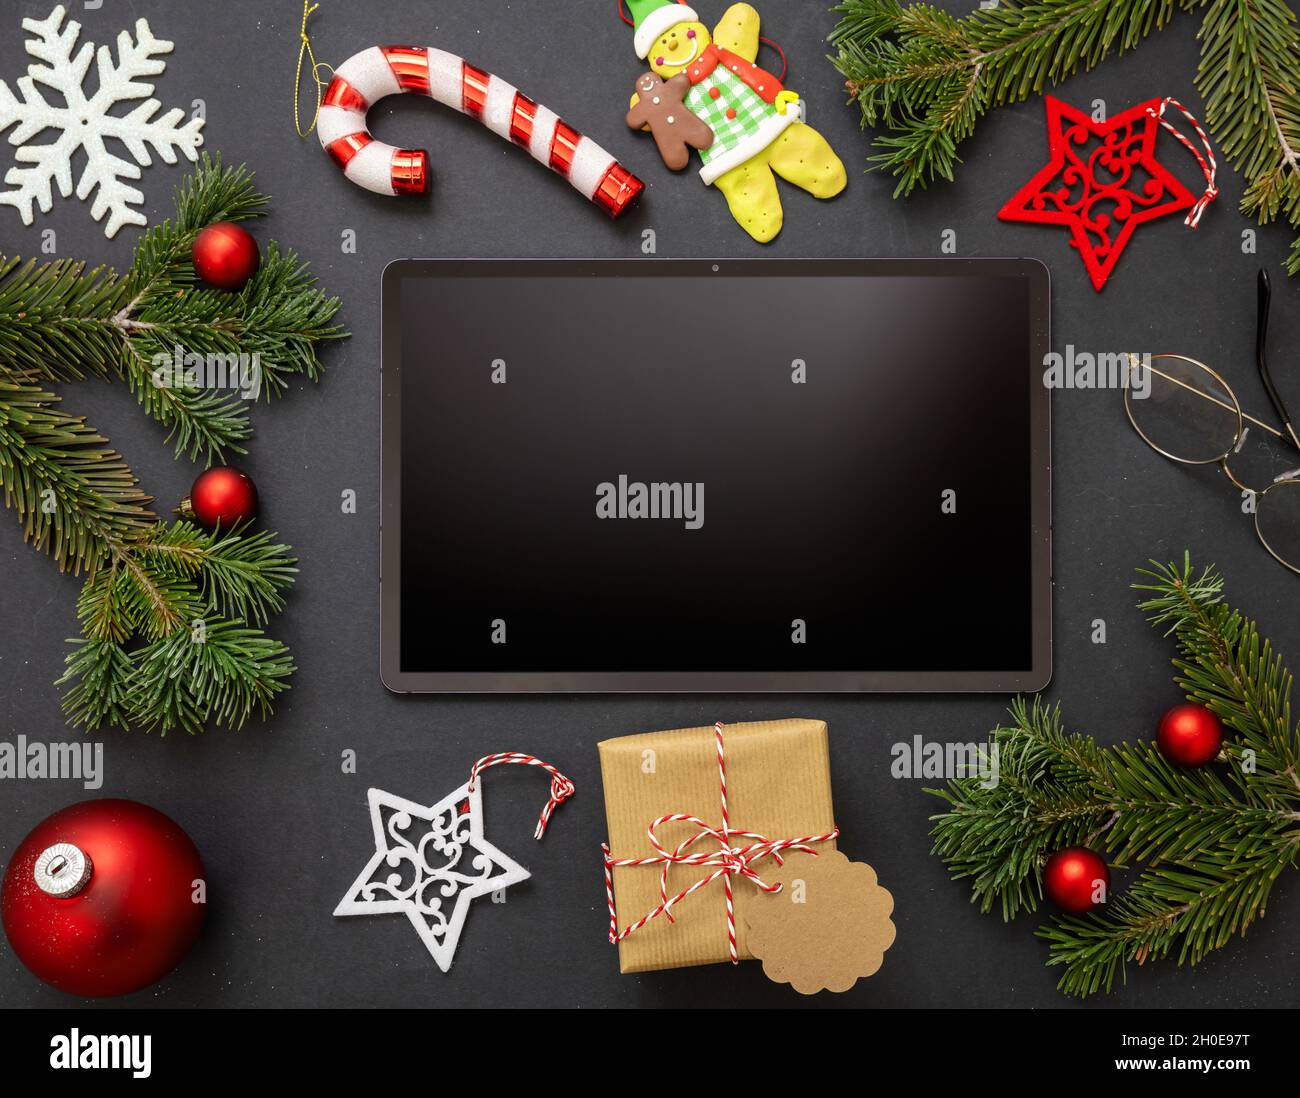 Christmas decoration and digital tablet on black background. Blank screen electronic device, copy space, greeting card template, top view Stock Photo